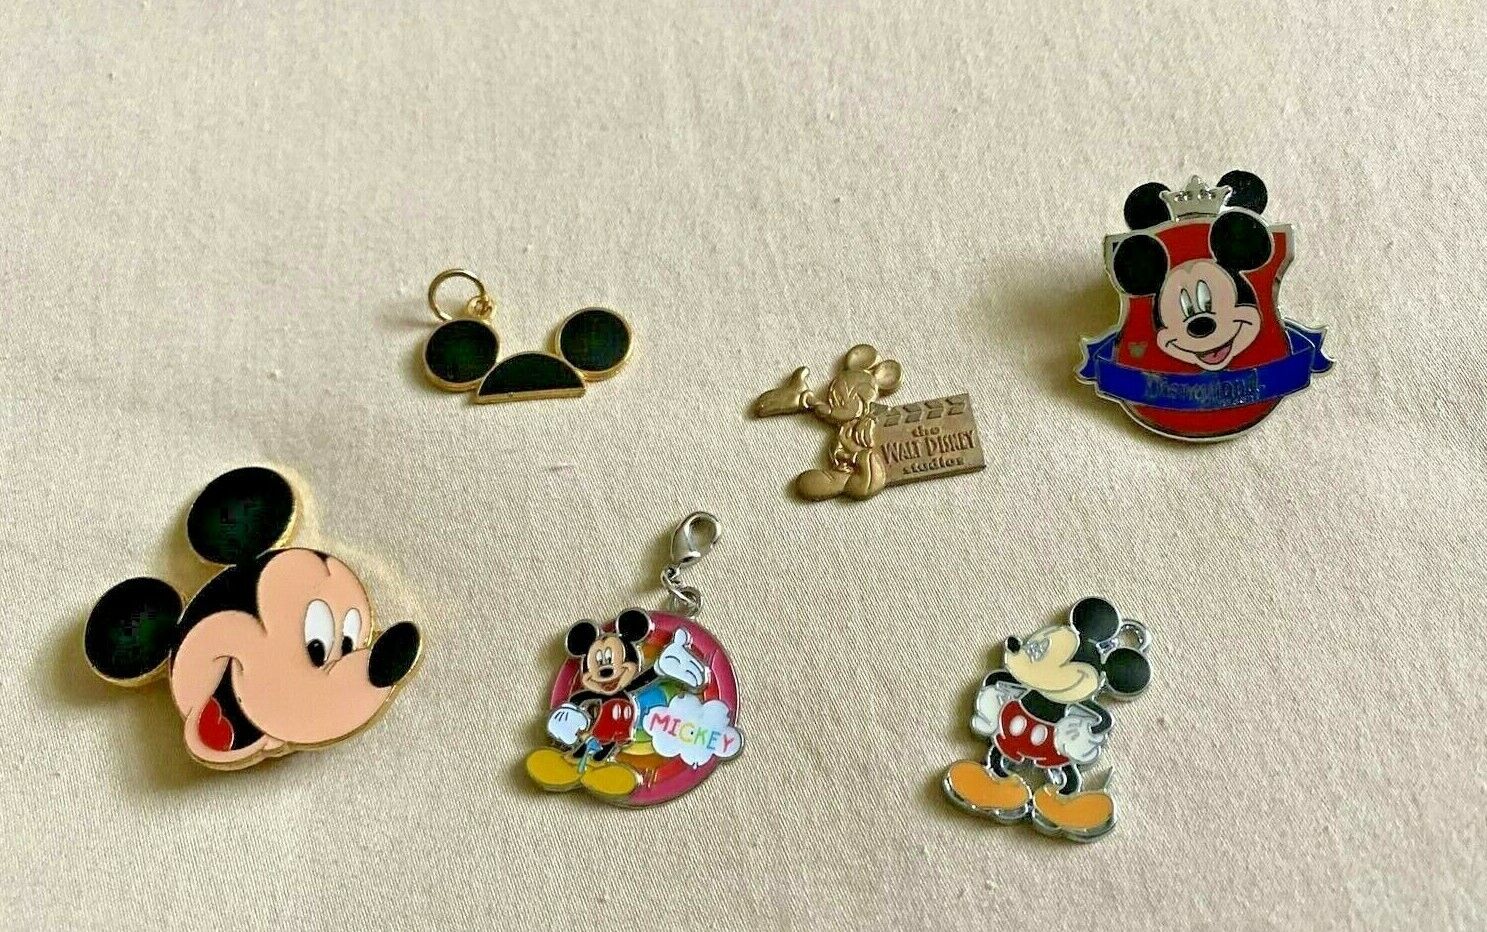 SIX Mickey Mouse Charms,Trading Pin 1 of 5, Face Brooch, Walt Disney Studios,  +